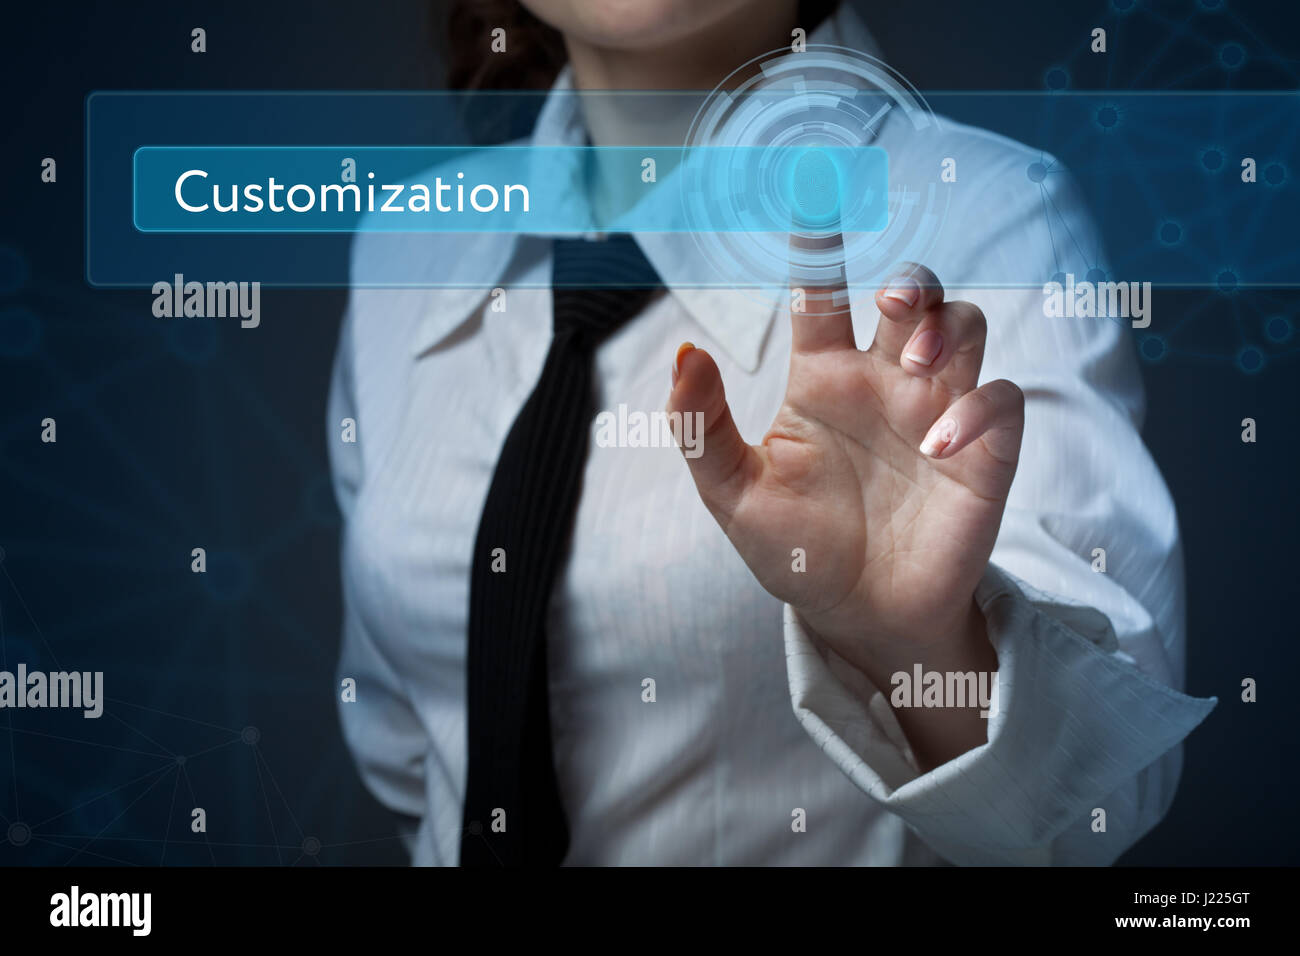 Business, technology, internet and networking concept. Business woman presses a button on the virtual screen: Customization Stock Photo